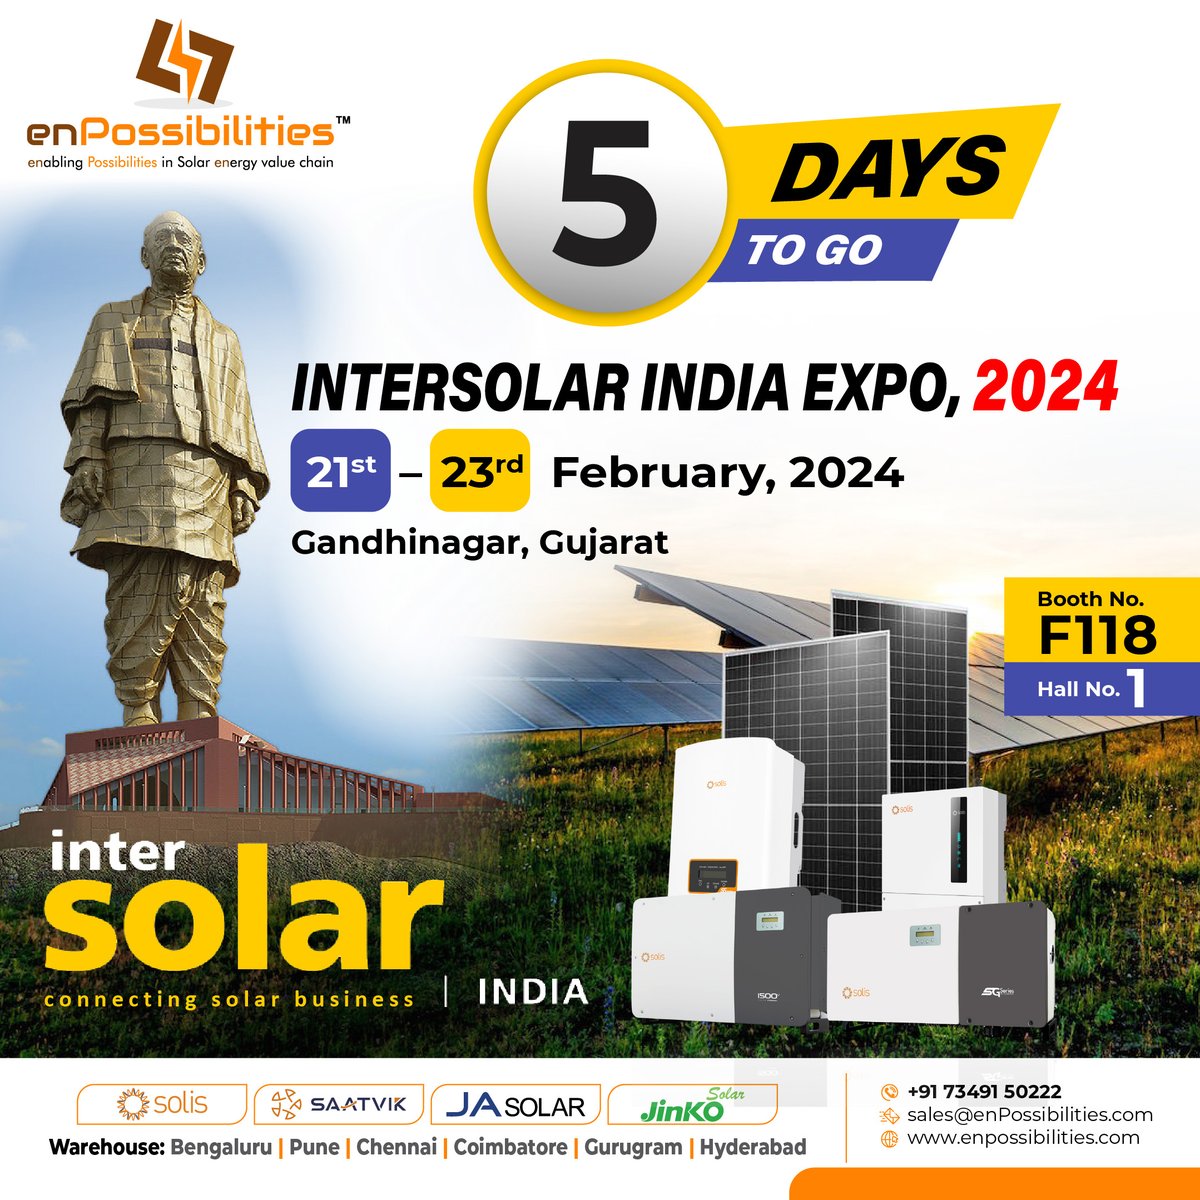 Counting down the days to the bright future of solar innovation at Intersolar India Expo 2024 in Gujarat! Only 5 days left to join the renewable energy revolution

#enpossibilities #gujaratexpo #intersolar2024 #SolarProducts